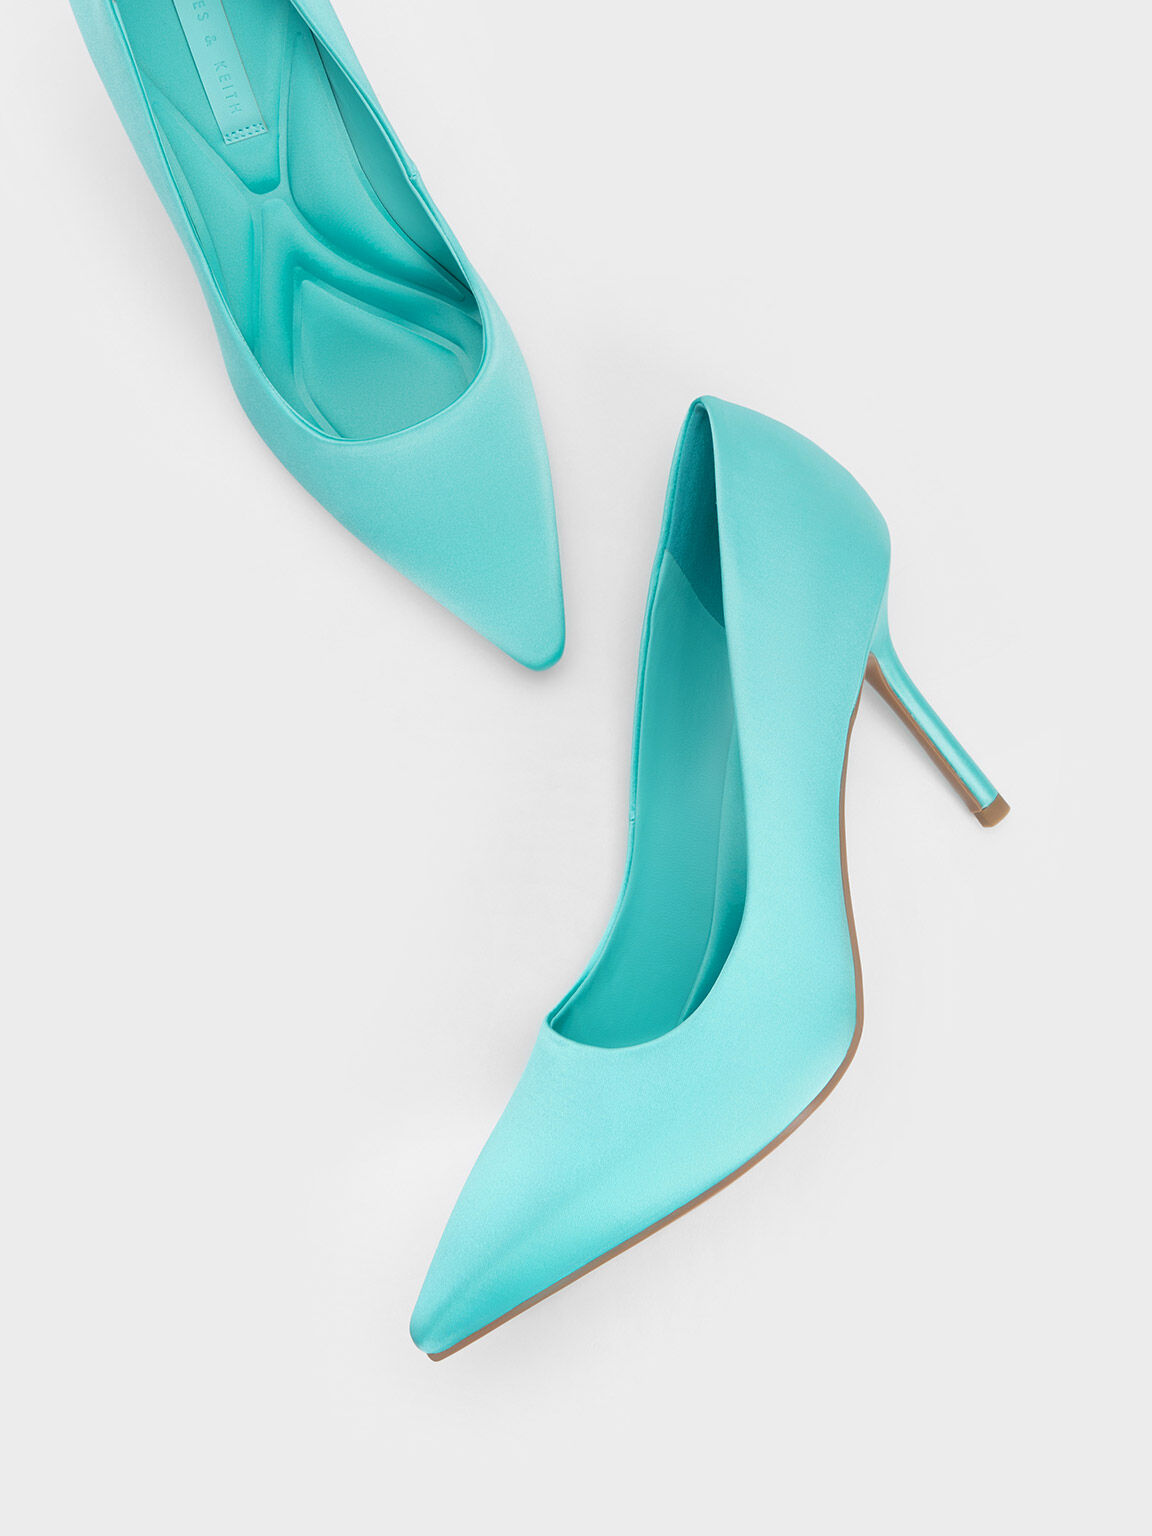 Stiletto Heels With Bows | Pointed Toe Stilettos-Dream Pairs